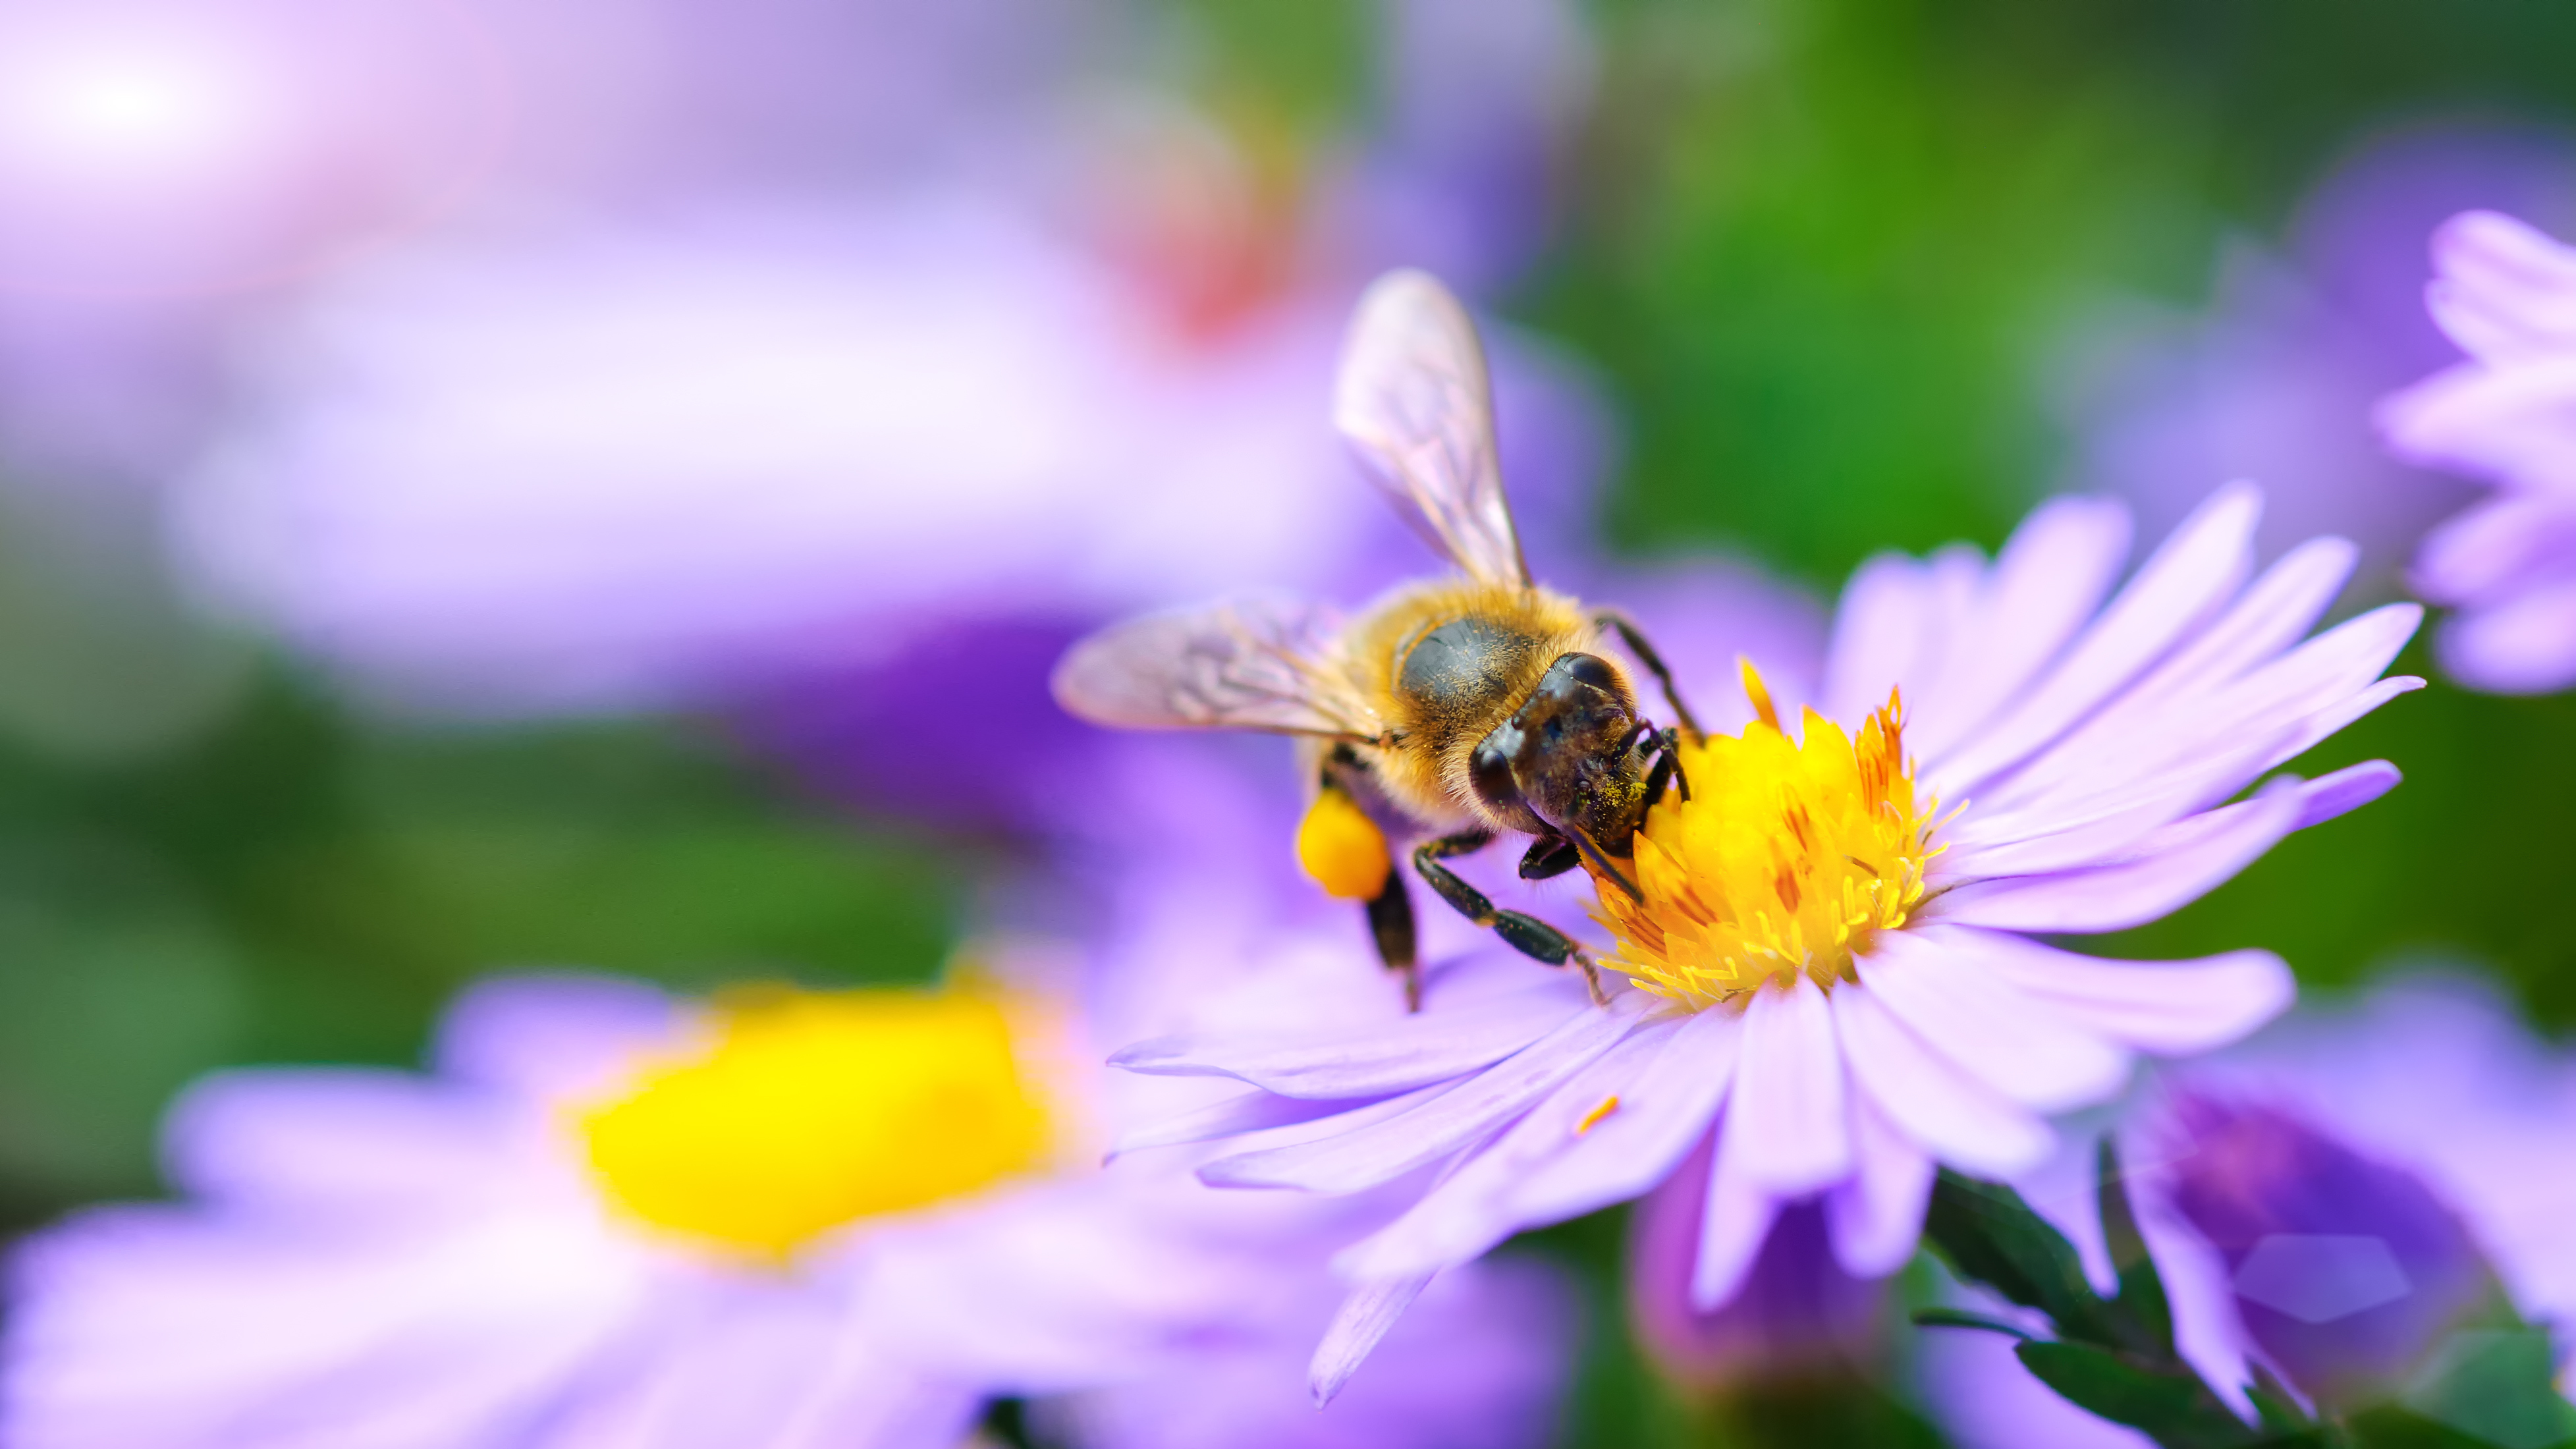 Bee lands on purple flower with yellow center.